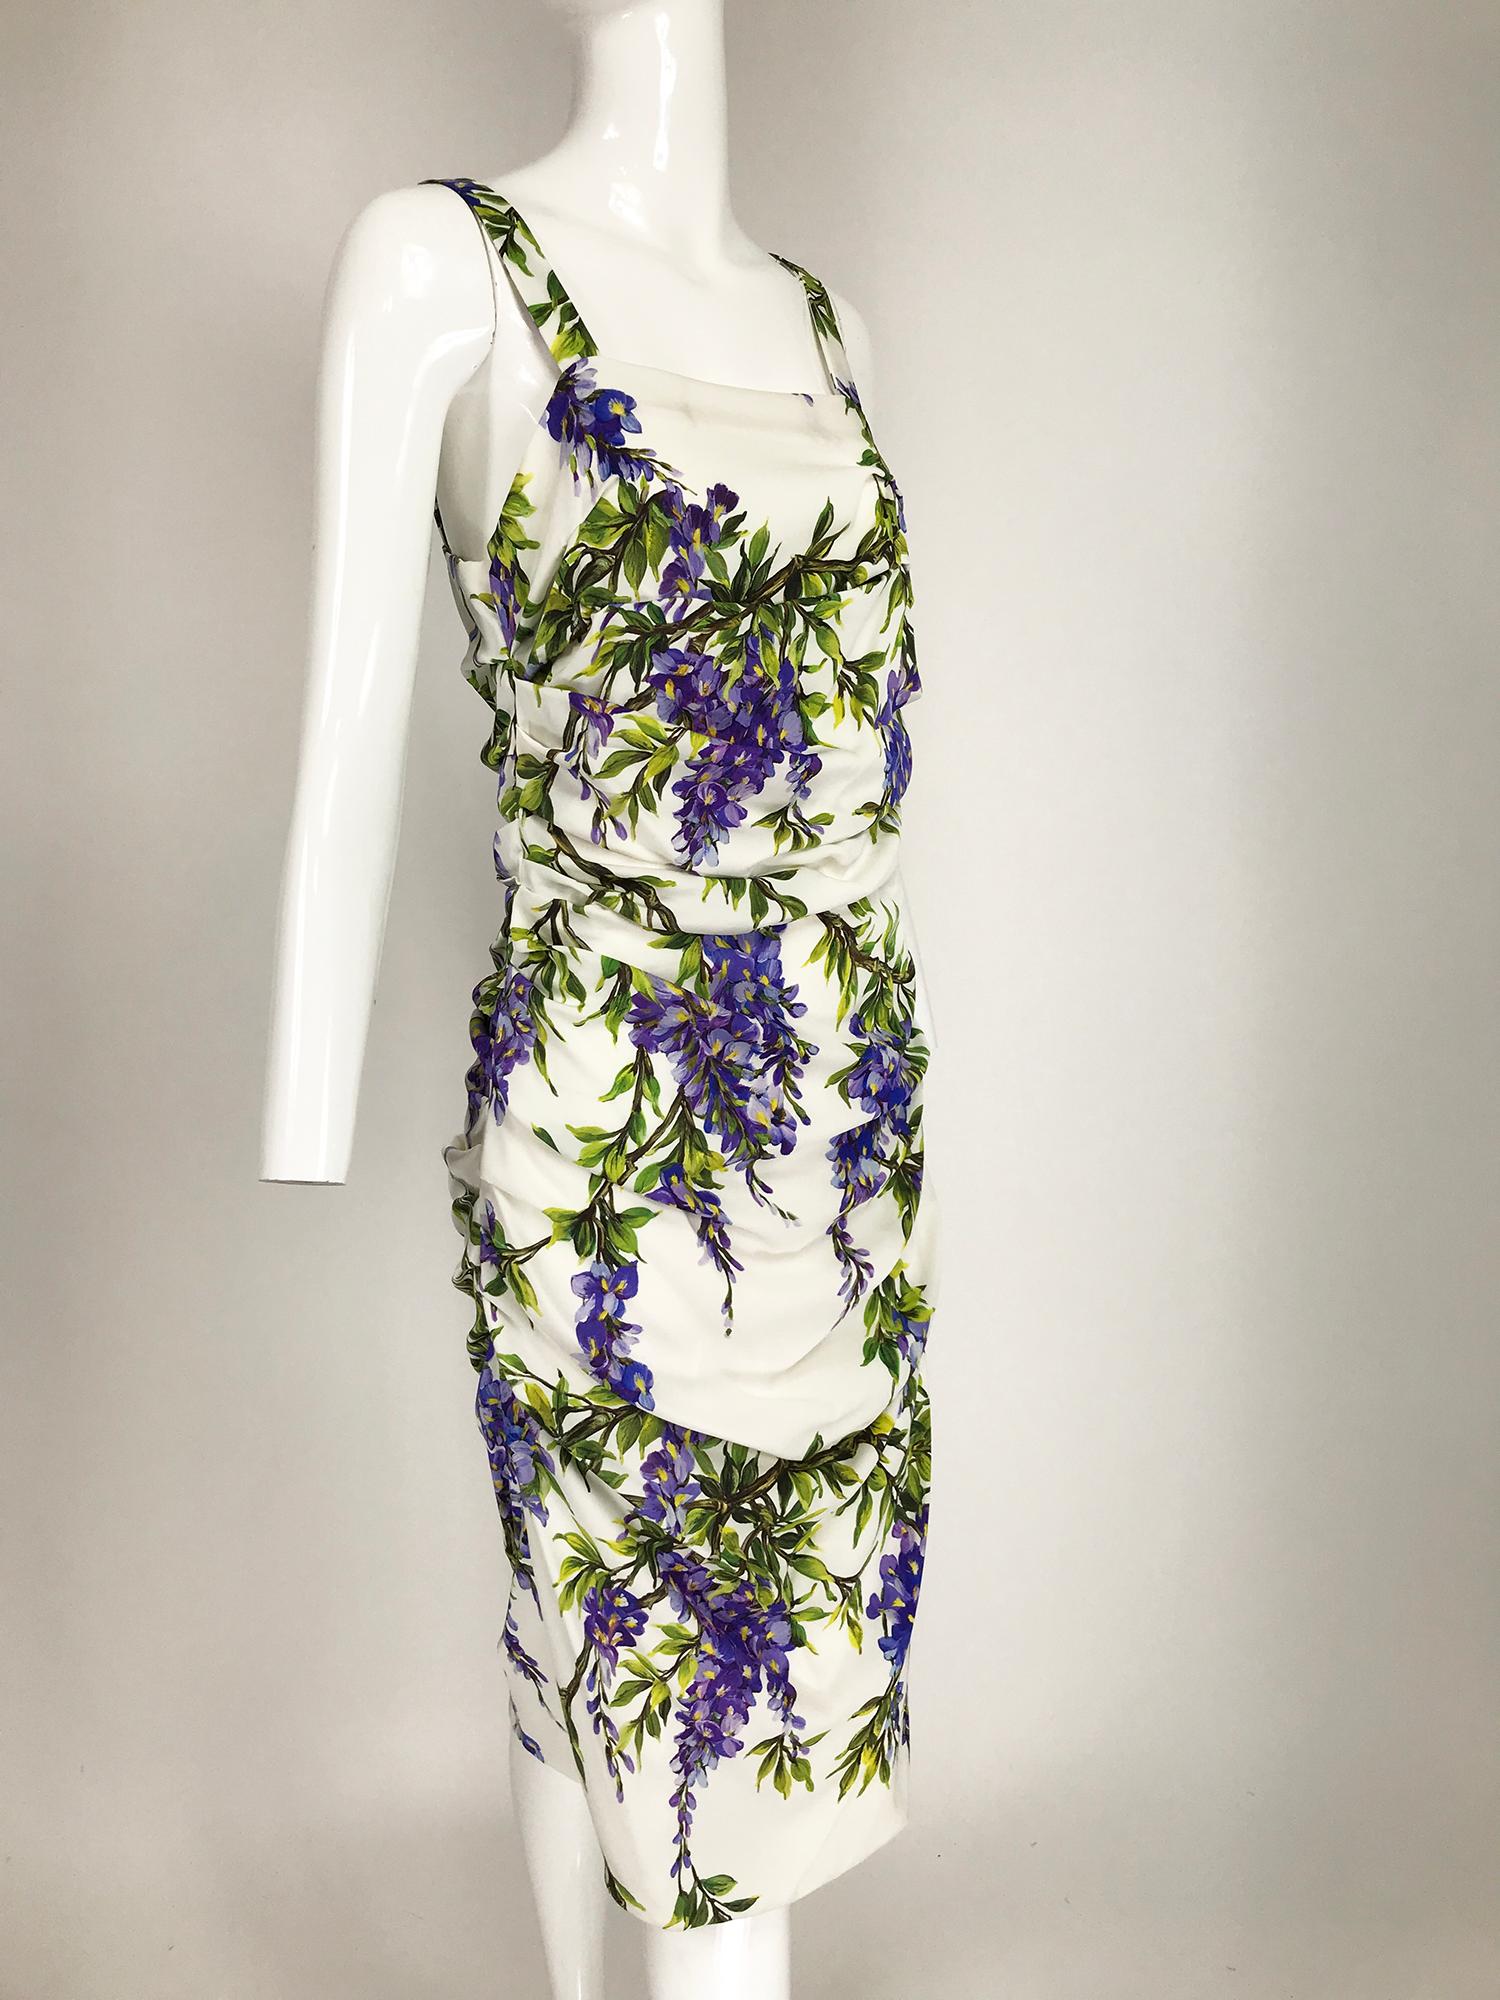 Dolce & Gabbana wisteria-print stretch silk blend crepe dress. Formfitting dress has a square low neckline at front and back, sleeveless with wide shoulder straps. The ruched side seams create a draped bodice and skirt, nips at the natural waist.